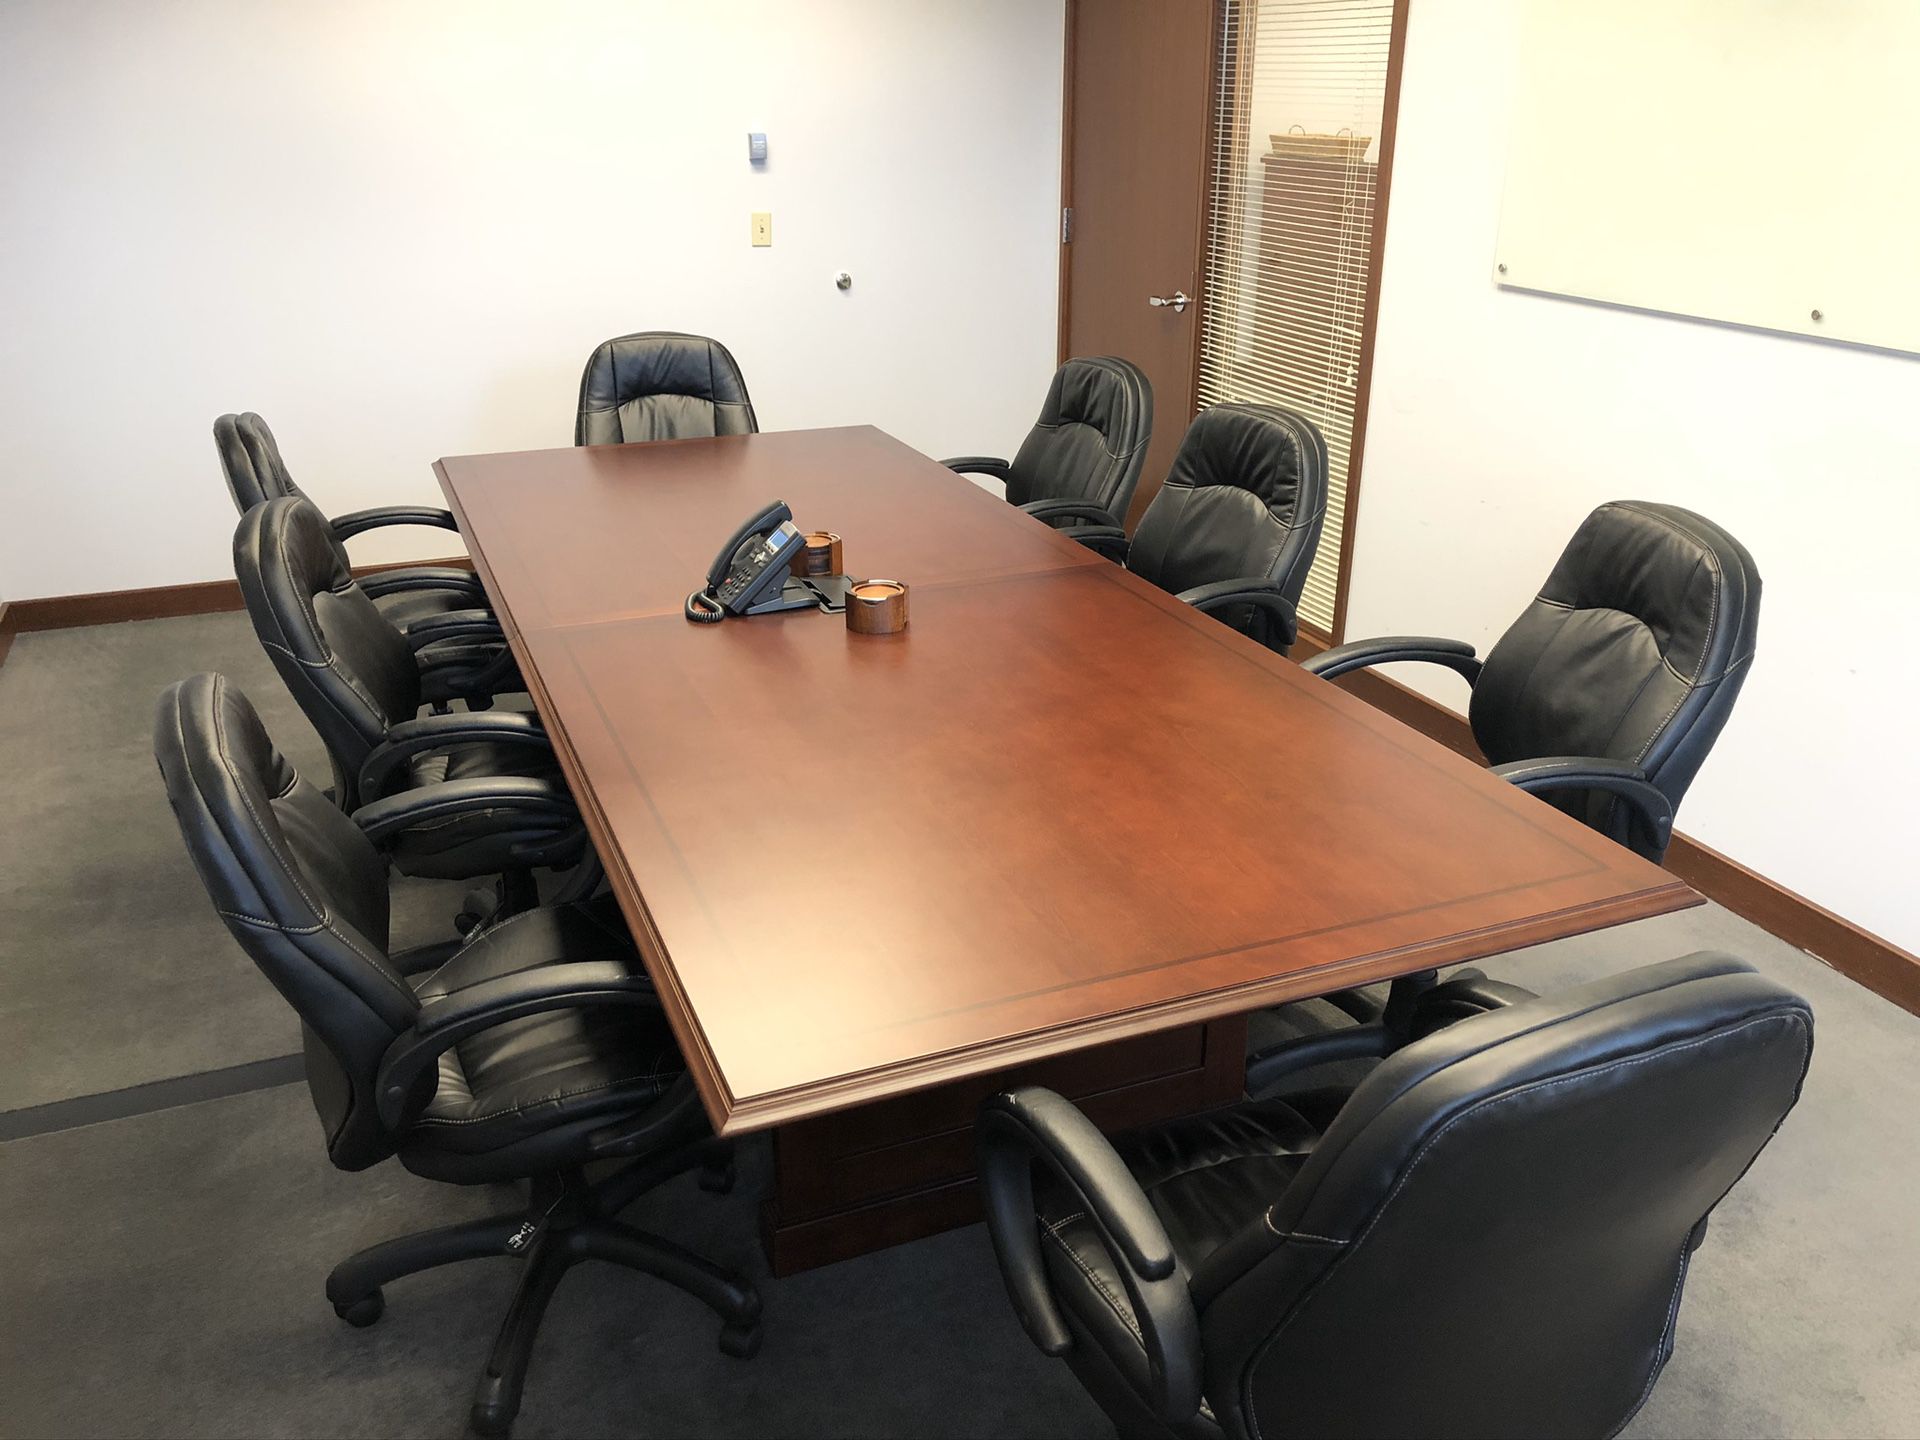 PENDING-120” Rectangular Conference Table, Mahogany